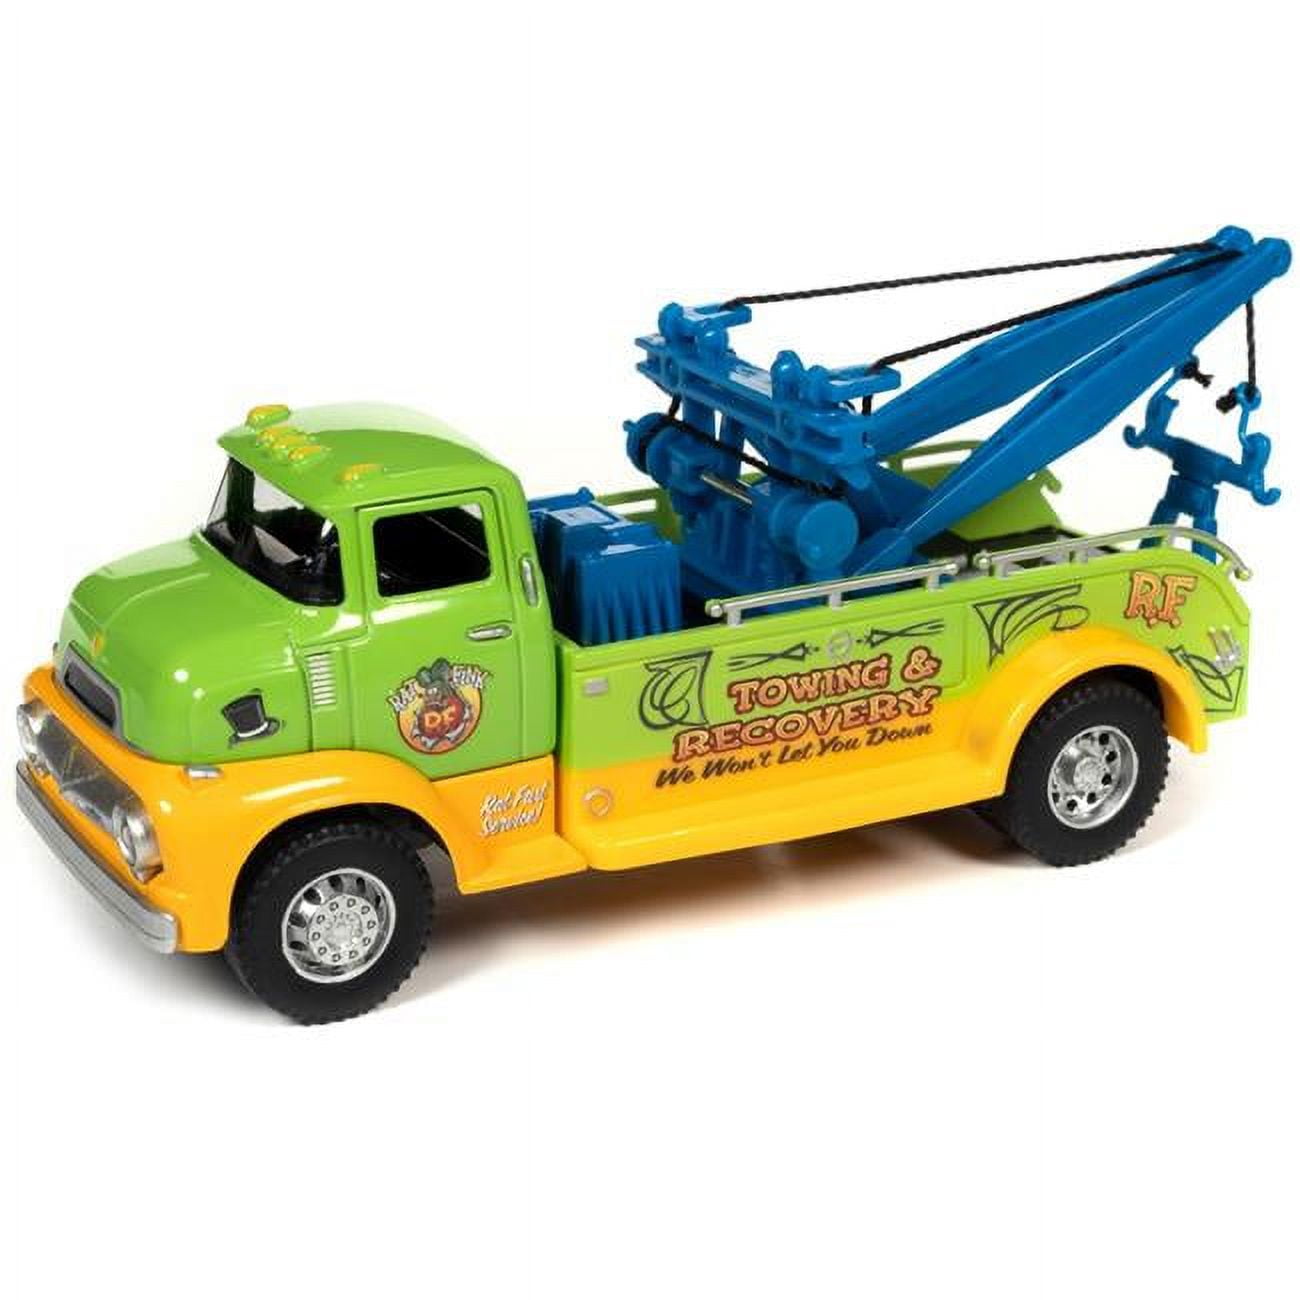 Picture of Autoworld AW317 Rat Fink Towing & Recovery Garage & Tow Diorama Set for 1 by 32 Scale Models Truck